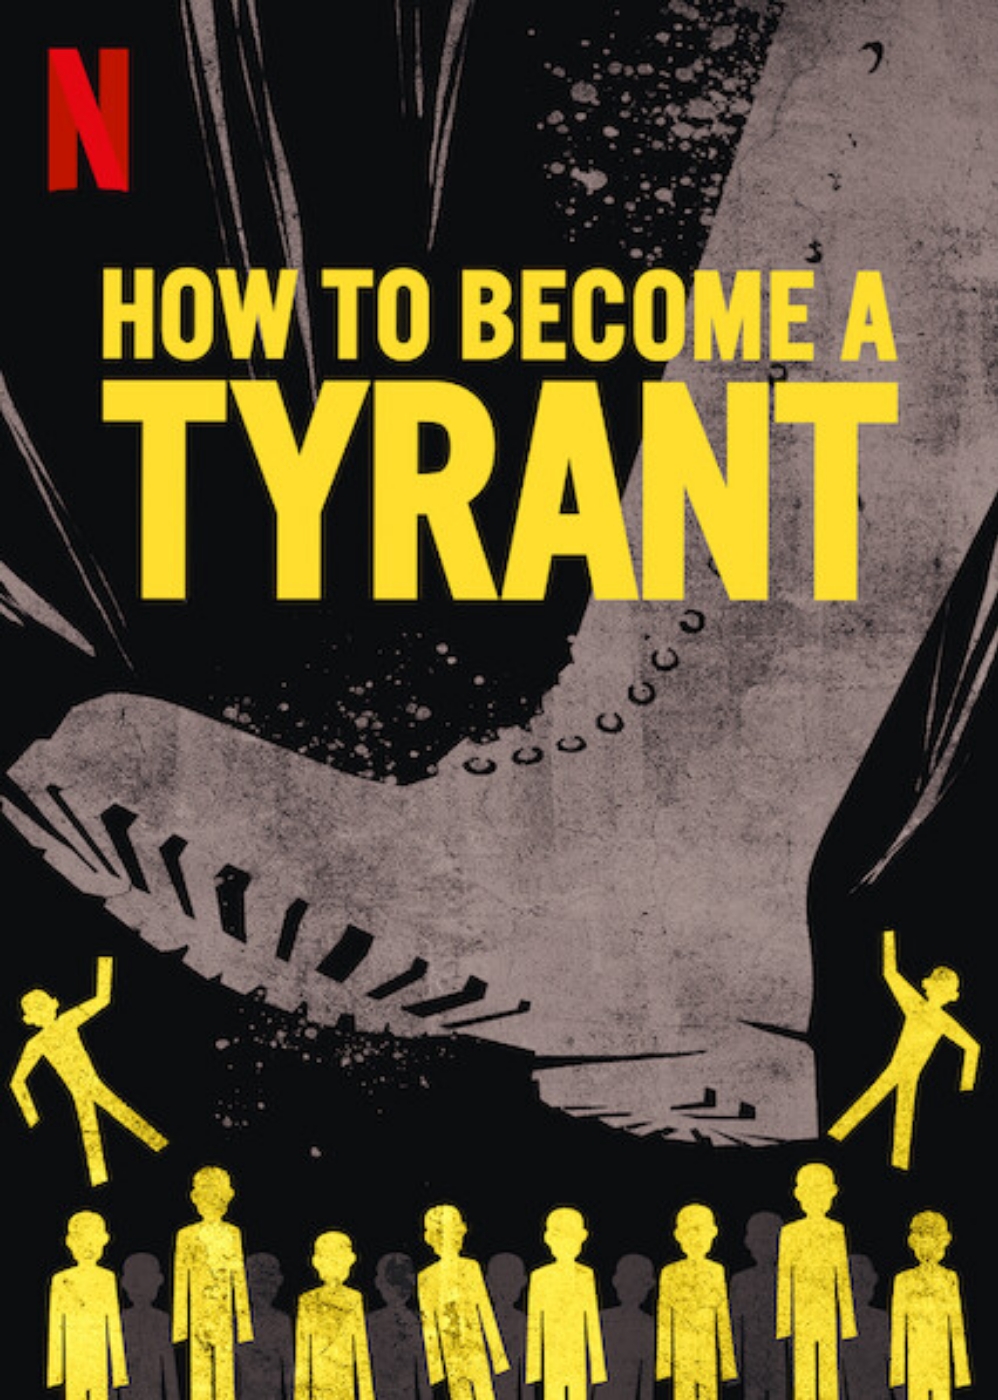 The Netflix documentary ‘How To Become A Tyrant’ reveals secrets infamous dictators exploited to seize and cling to power